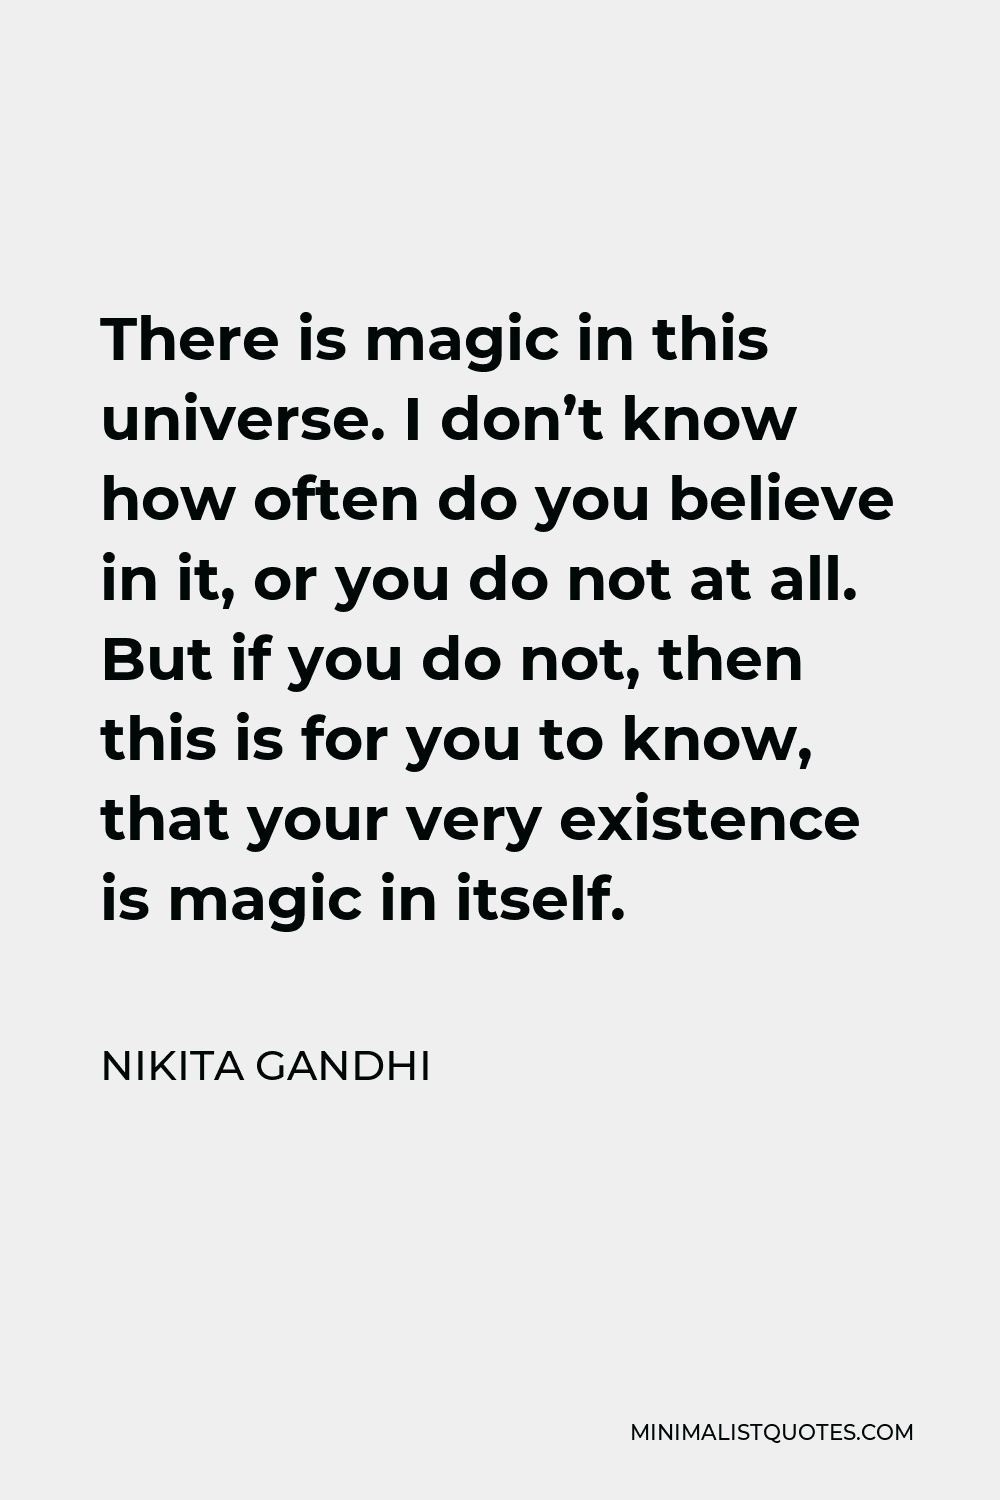 Nikita Gandhi Quote - There is magic in this universe. I don’t know how often do you believe in it, or you do not at all. But if you do not, then this is for you to know, that your very existence is magic in itself.